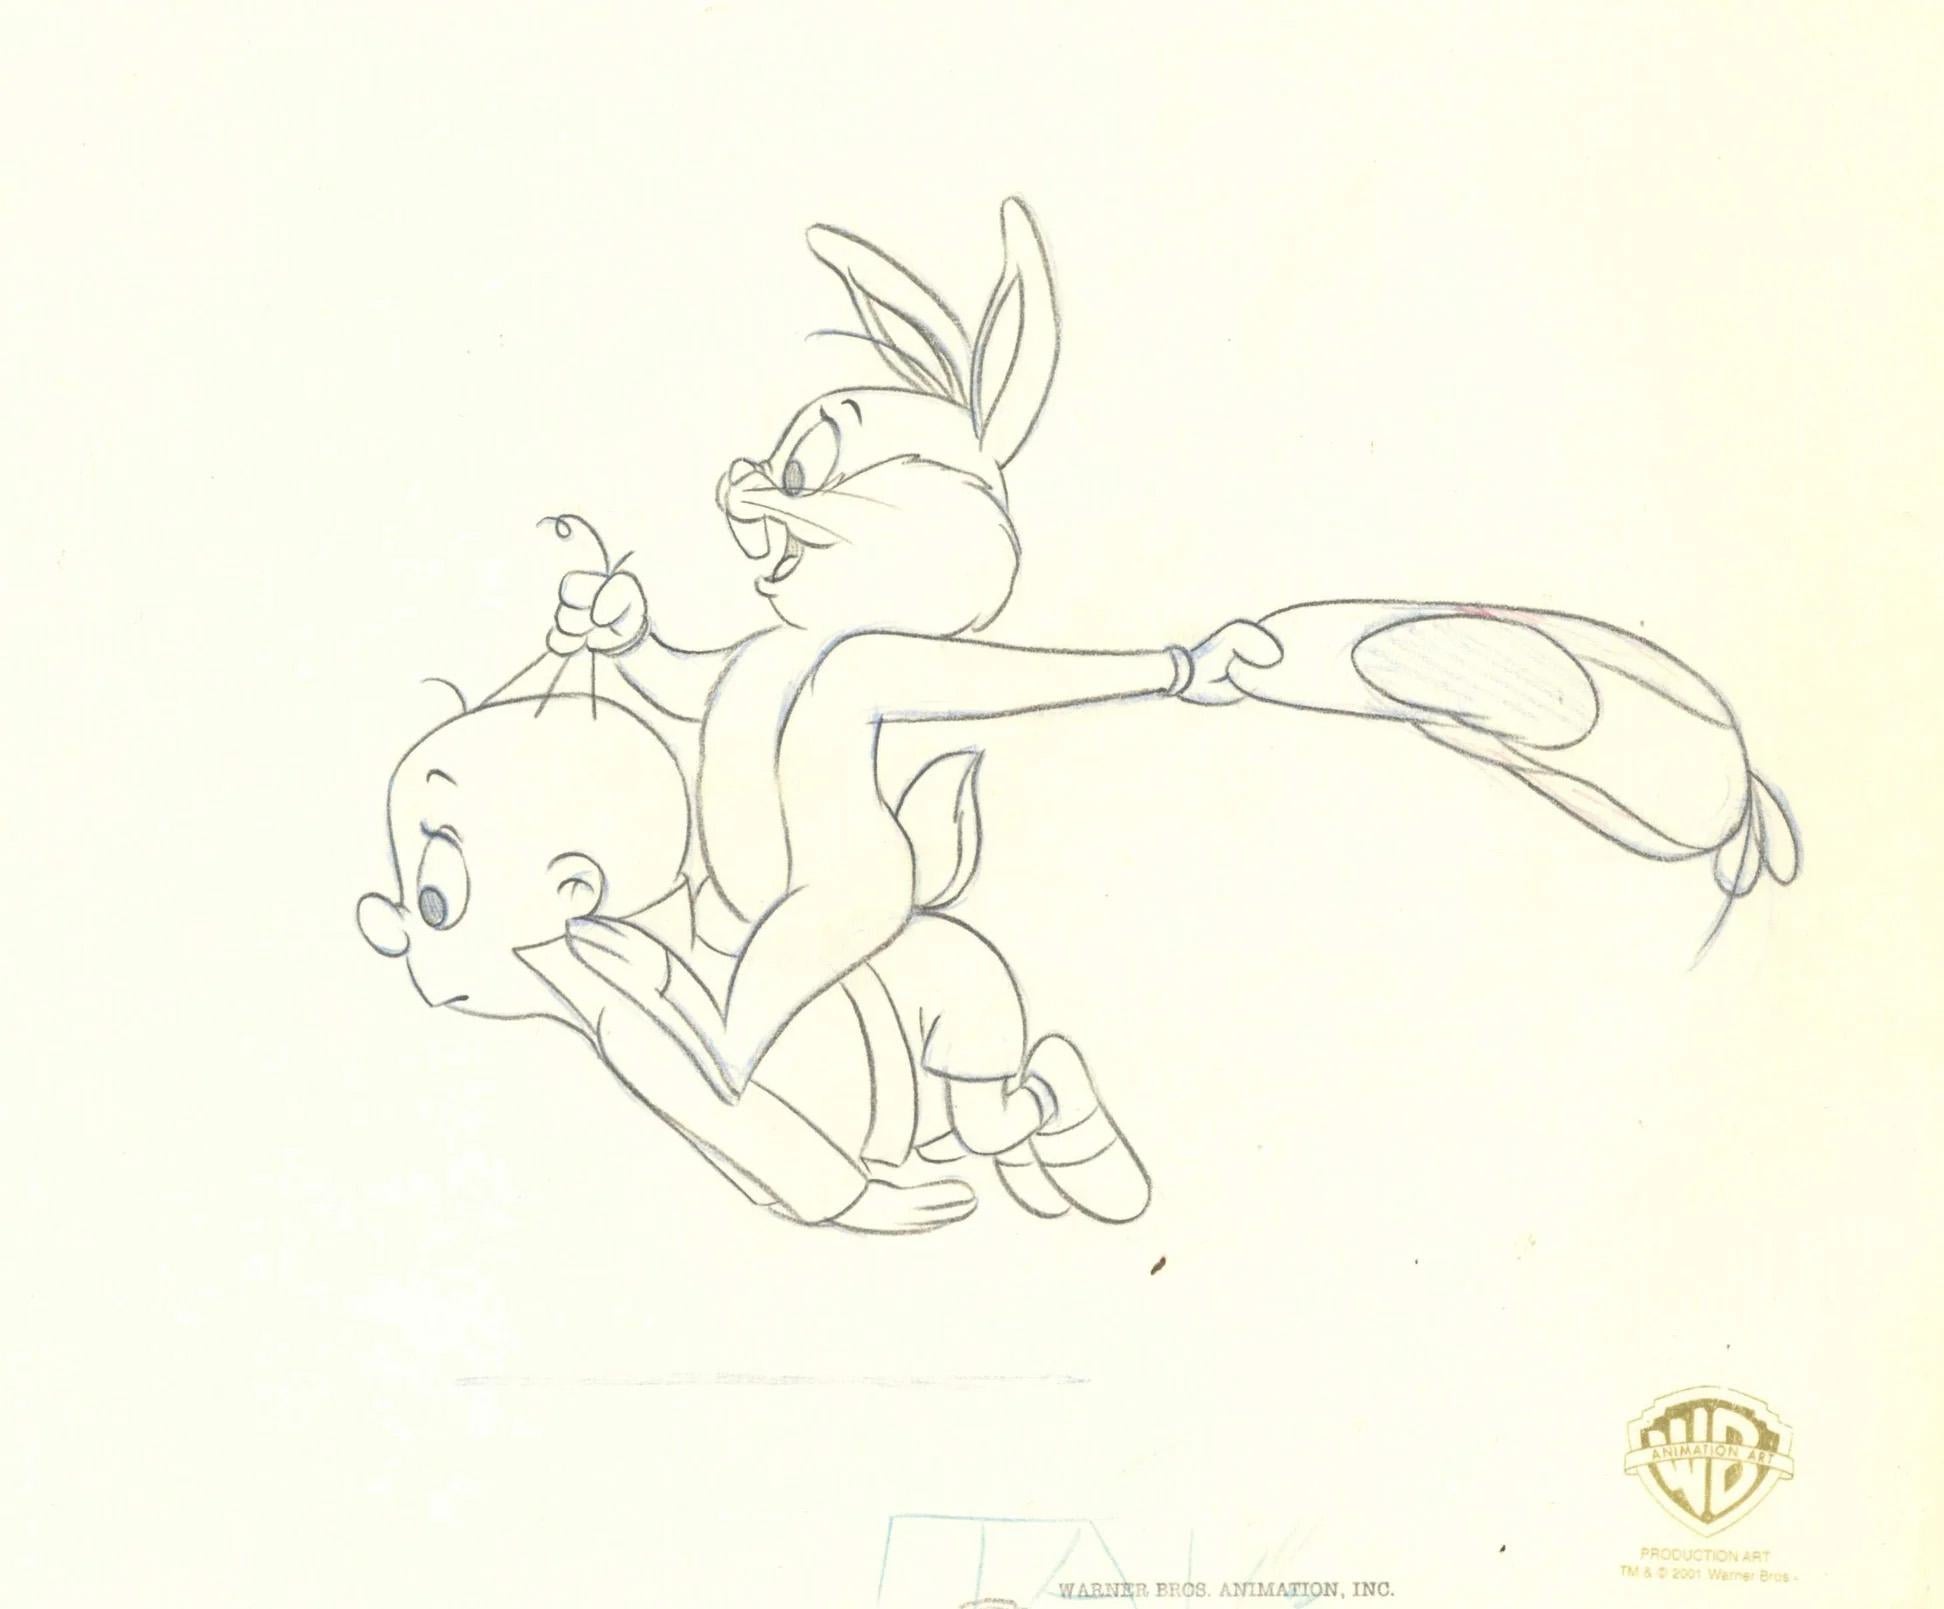 Looney Tunes Original Production Drawing: Baby Bugs Bunny and Baby Elmer - Art by Looney Tunes Studio Artists